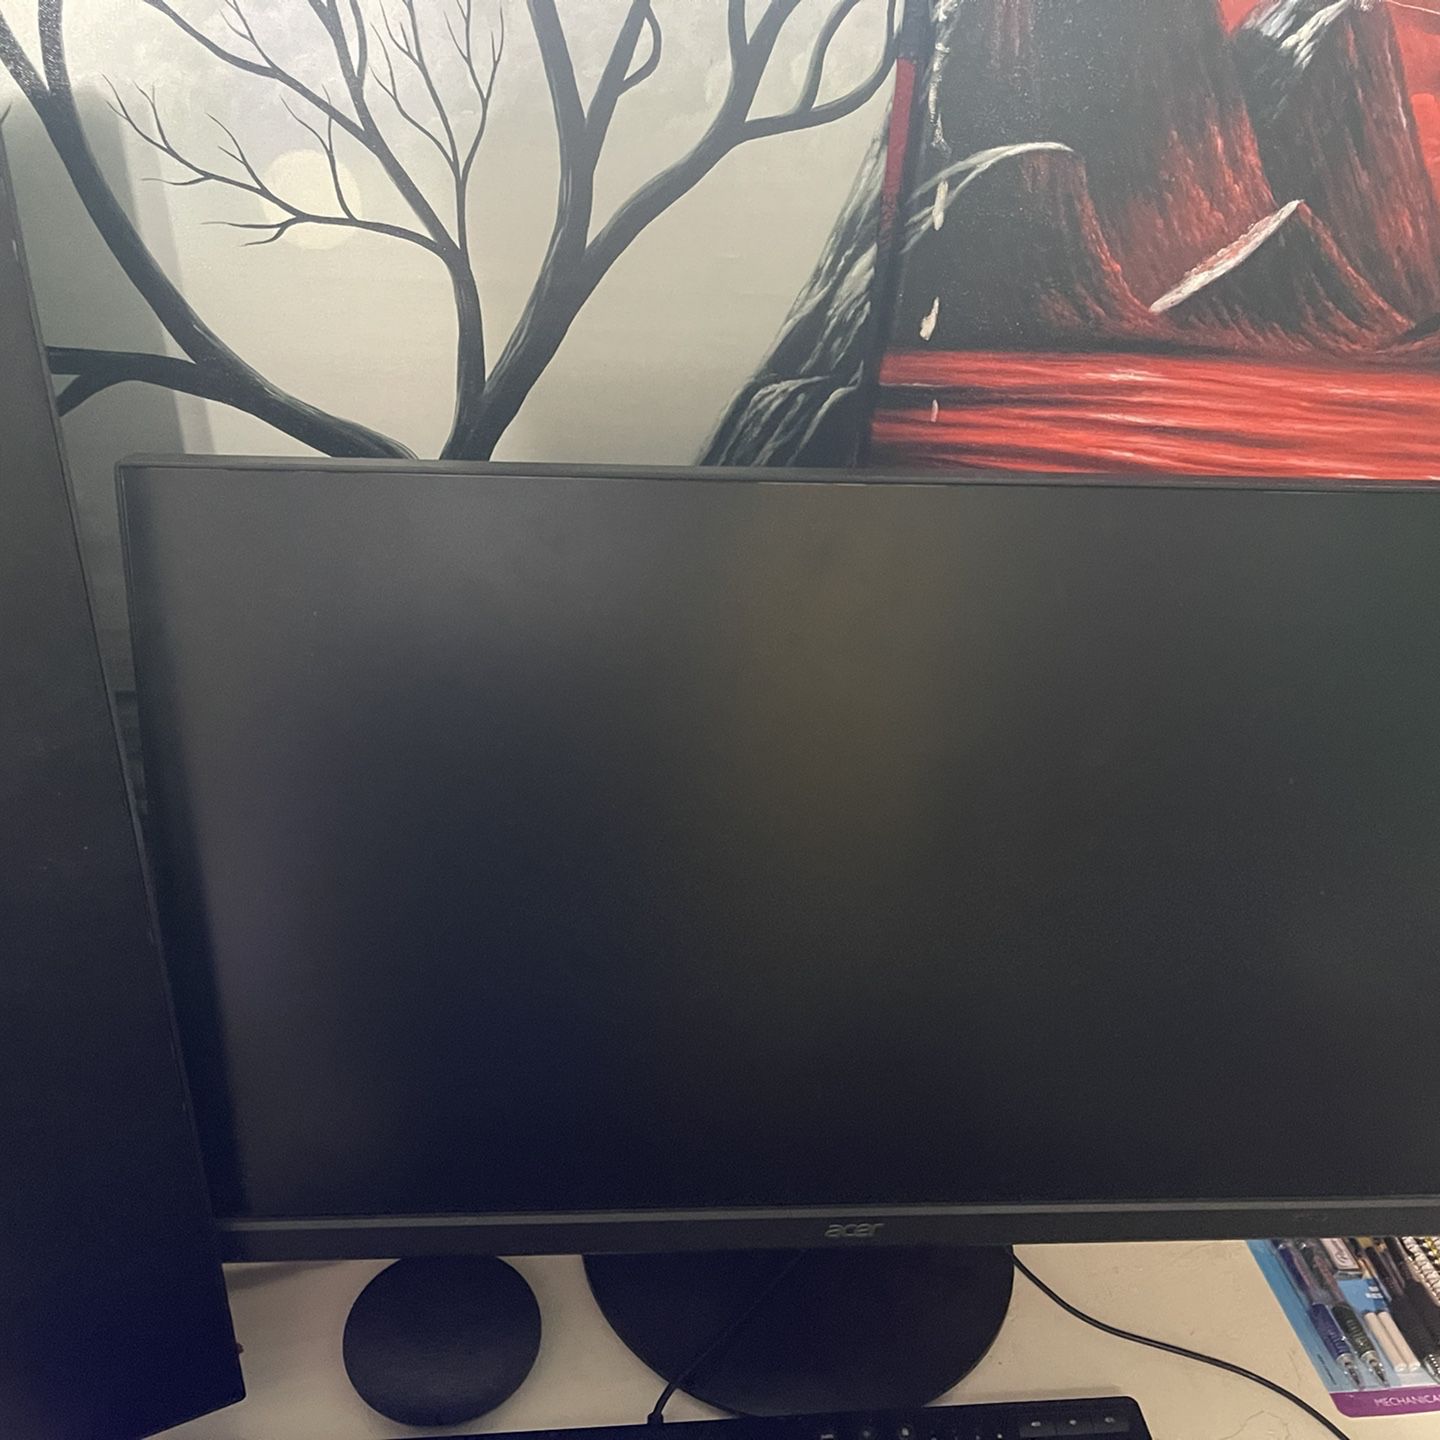 1 Acer Monitor Perfect For Gaming Vid Cinc and More